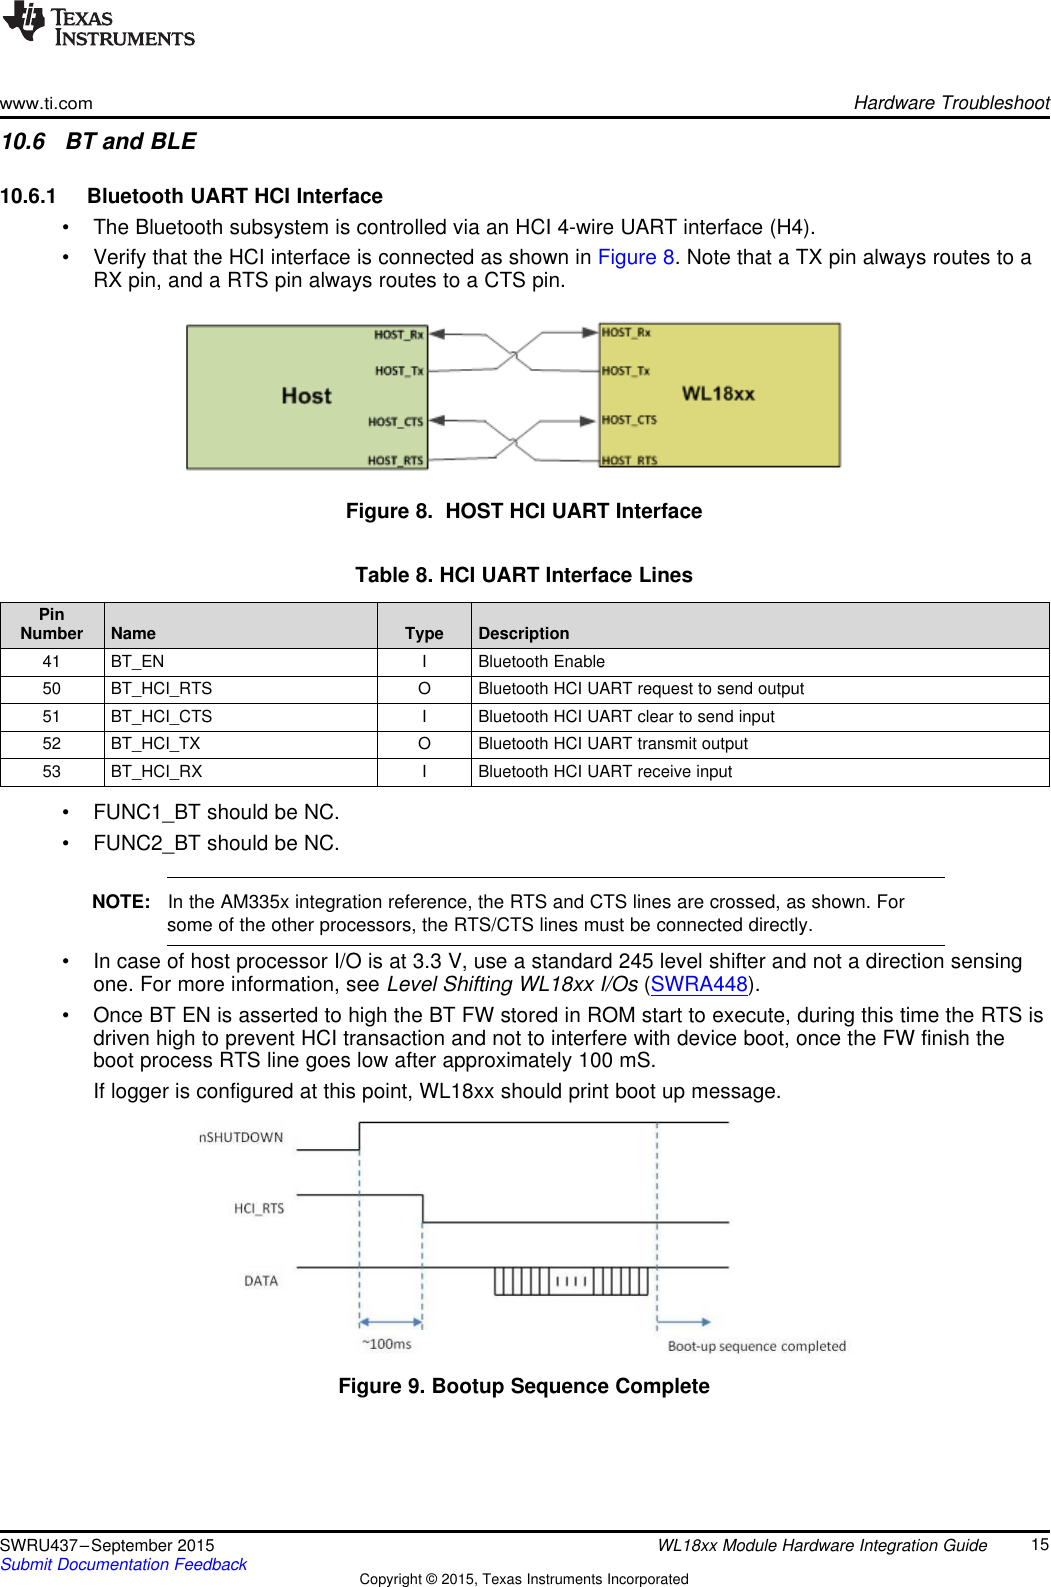 www.ti.comHardware Troubleshoot10.6 BT and BLE10.6.1 Bluetooth UART HCI Interface• The Bluetooth subsystem is controlled via an HCI 4-wire UART interface (H4).• Verify that the HCI interface is connected as shown in Figure 8. Note that a TX pin always routes to aRX pin, and a RTS pin always routes to a CTS pin.Figure 8. HOST HCI UART InterfaceTable 8. HCI UART Interface LinesPinNumber Name Type Description41 BT_EN I Bluetooth Enable50 BT_HCI_RTS O Bluetooth HCI UART request to send output51 BT_HCI_CTS I Bluetooth HCI UART clear to send input52 BT_HCI_TX O Bluetooth HCI UART transmit output53 BT_HCI_RX I Bluetooth HCI UART receive input• FUNC1_BT should be NC.• FUNC2_BT should be NC.NOTE: In the AM335x integration reference, the RTS and CTS lines are crossed, as shown. Forsome of the other processors, the RTS/CTS lines must be connected directly.• In case of host processor I/O is at 3.3 V, use a standard 245 level shifter and not a direction sensingone. For more information, see Level Shifting WL18xx I/Os (SWRA448).• Once BT EN is asserted to high the BT FW stored in ROM start to execute, during this time the RTS isdriven high to prevent HCI transaction and not to interfere with device boot, once the FW finish theboot process RTS line goes low after approximately 100 mS.If logger is configured at this point, WL18xx should print boot up message.Figure 9. Bootup Sequence Complete15SWRU437–September 2015 WL18xx Module Hardware Integration GuideSubmit Documentation Feedback Copyright © 2015, Texas Instruments Incorporated